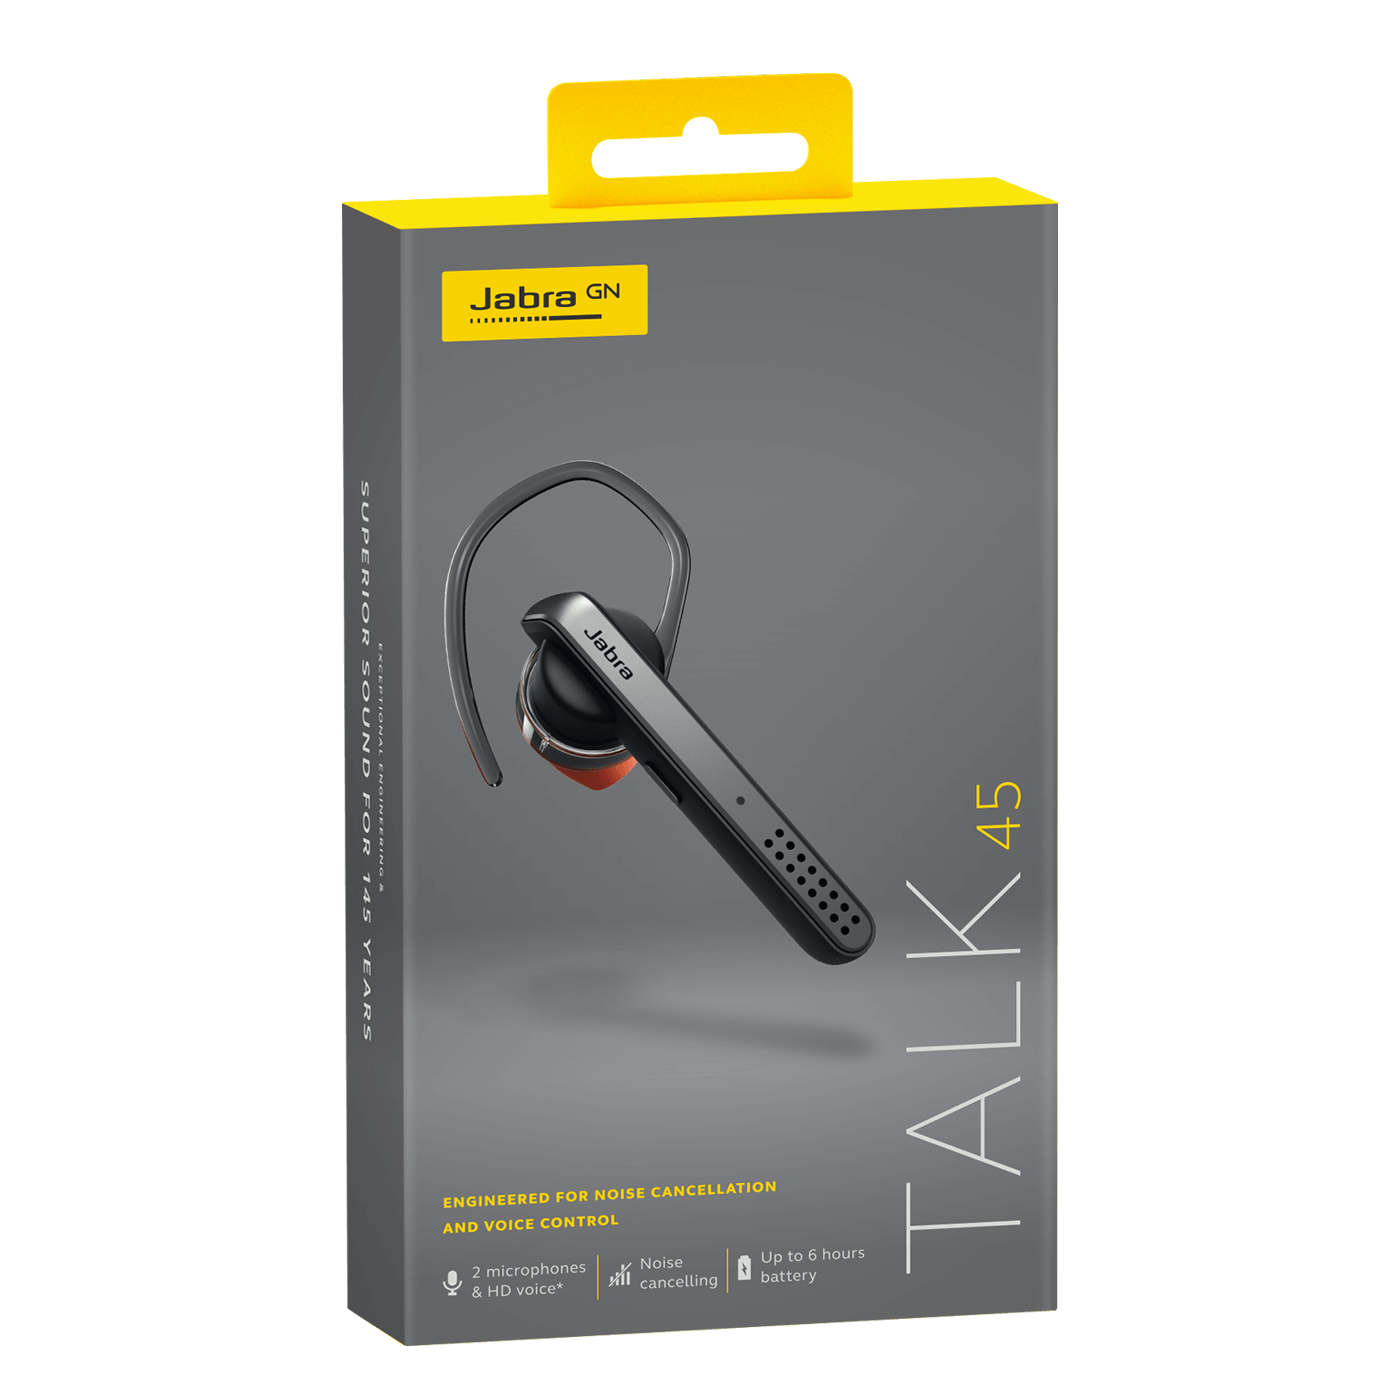 Jabra Talk 45 Bluetooth Headset with car charger (Silver)